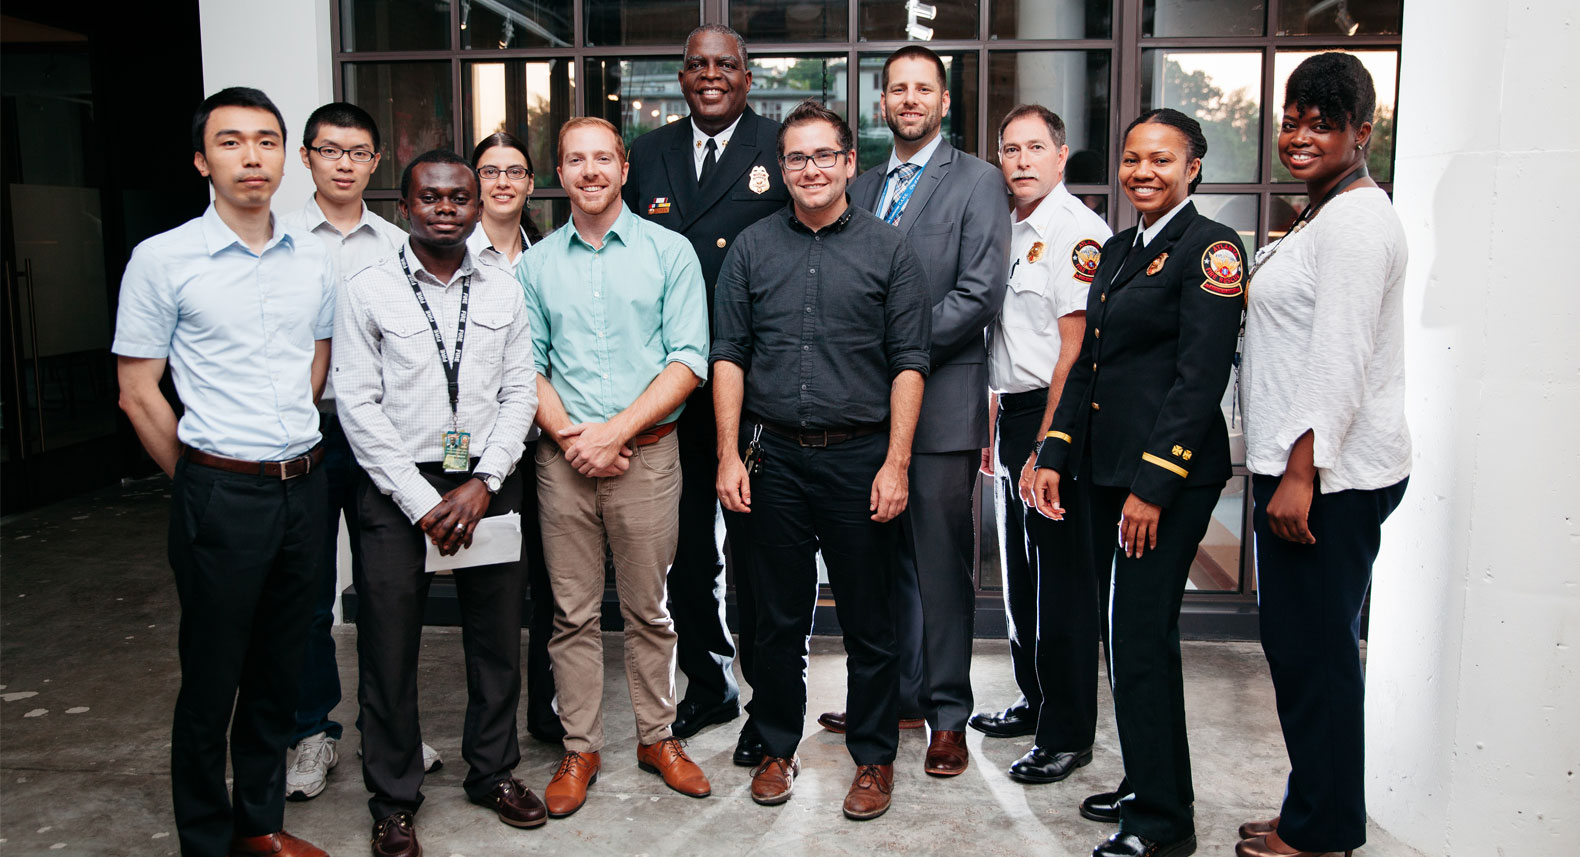 Group photo of Data Science for Social Good students with City of Atlanta Fire Rescue Department leaders